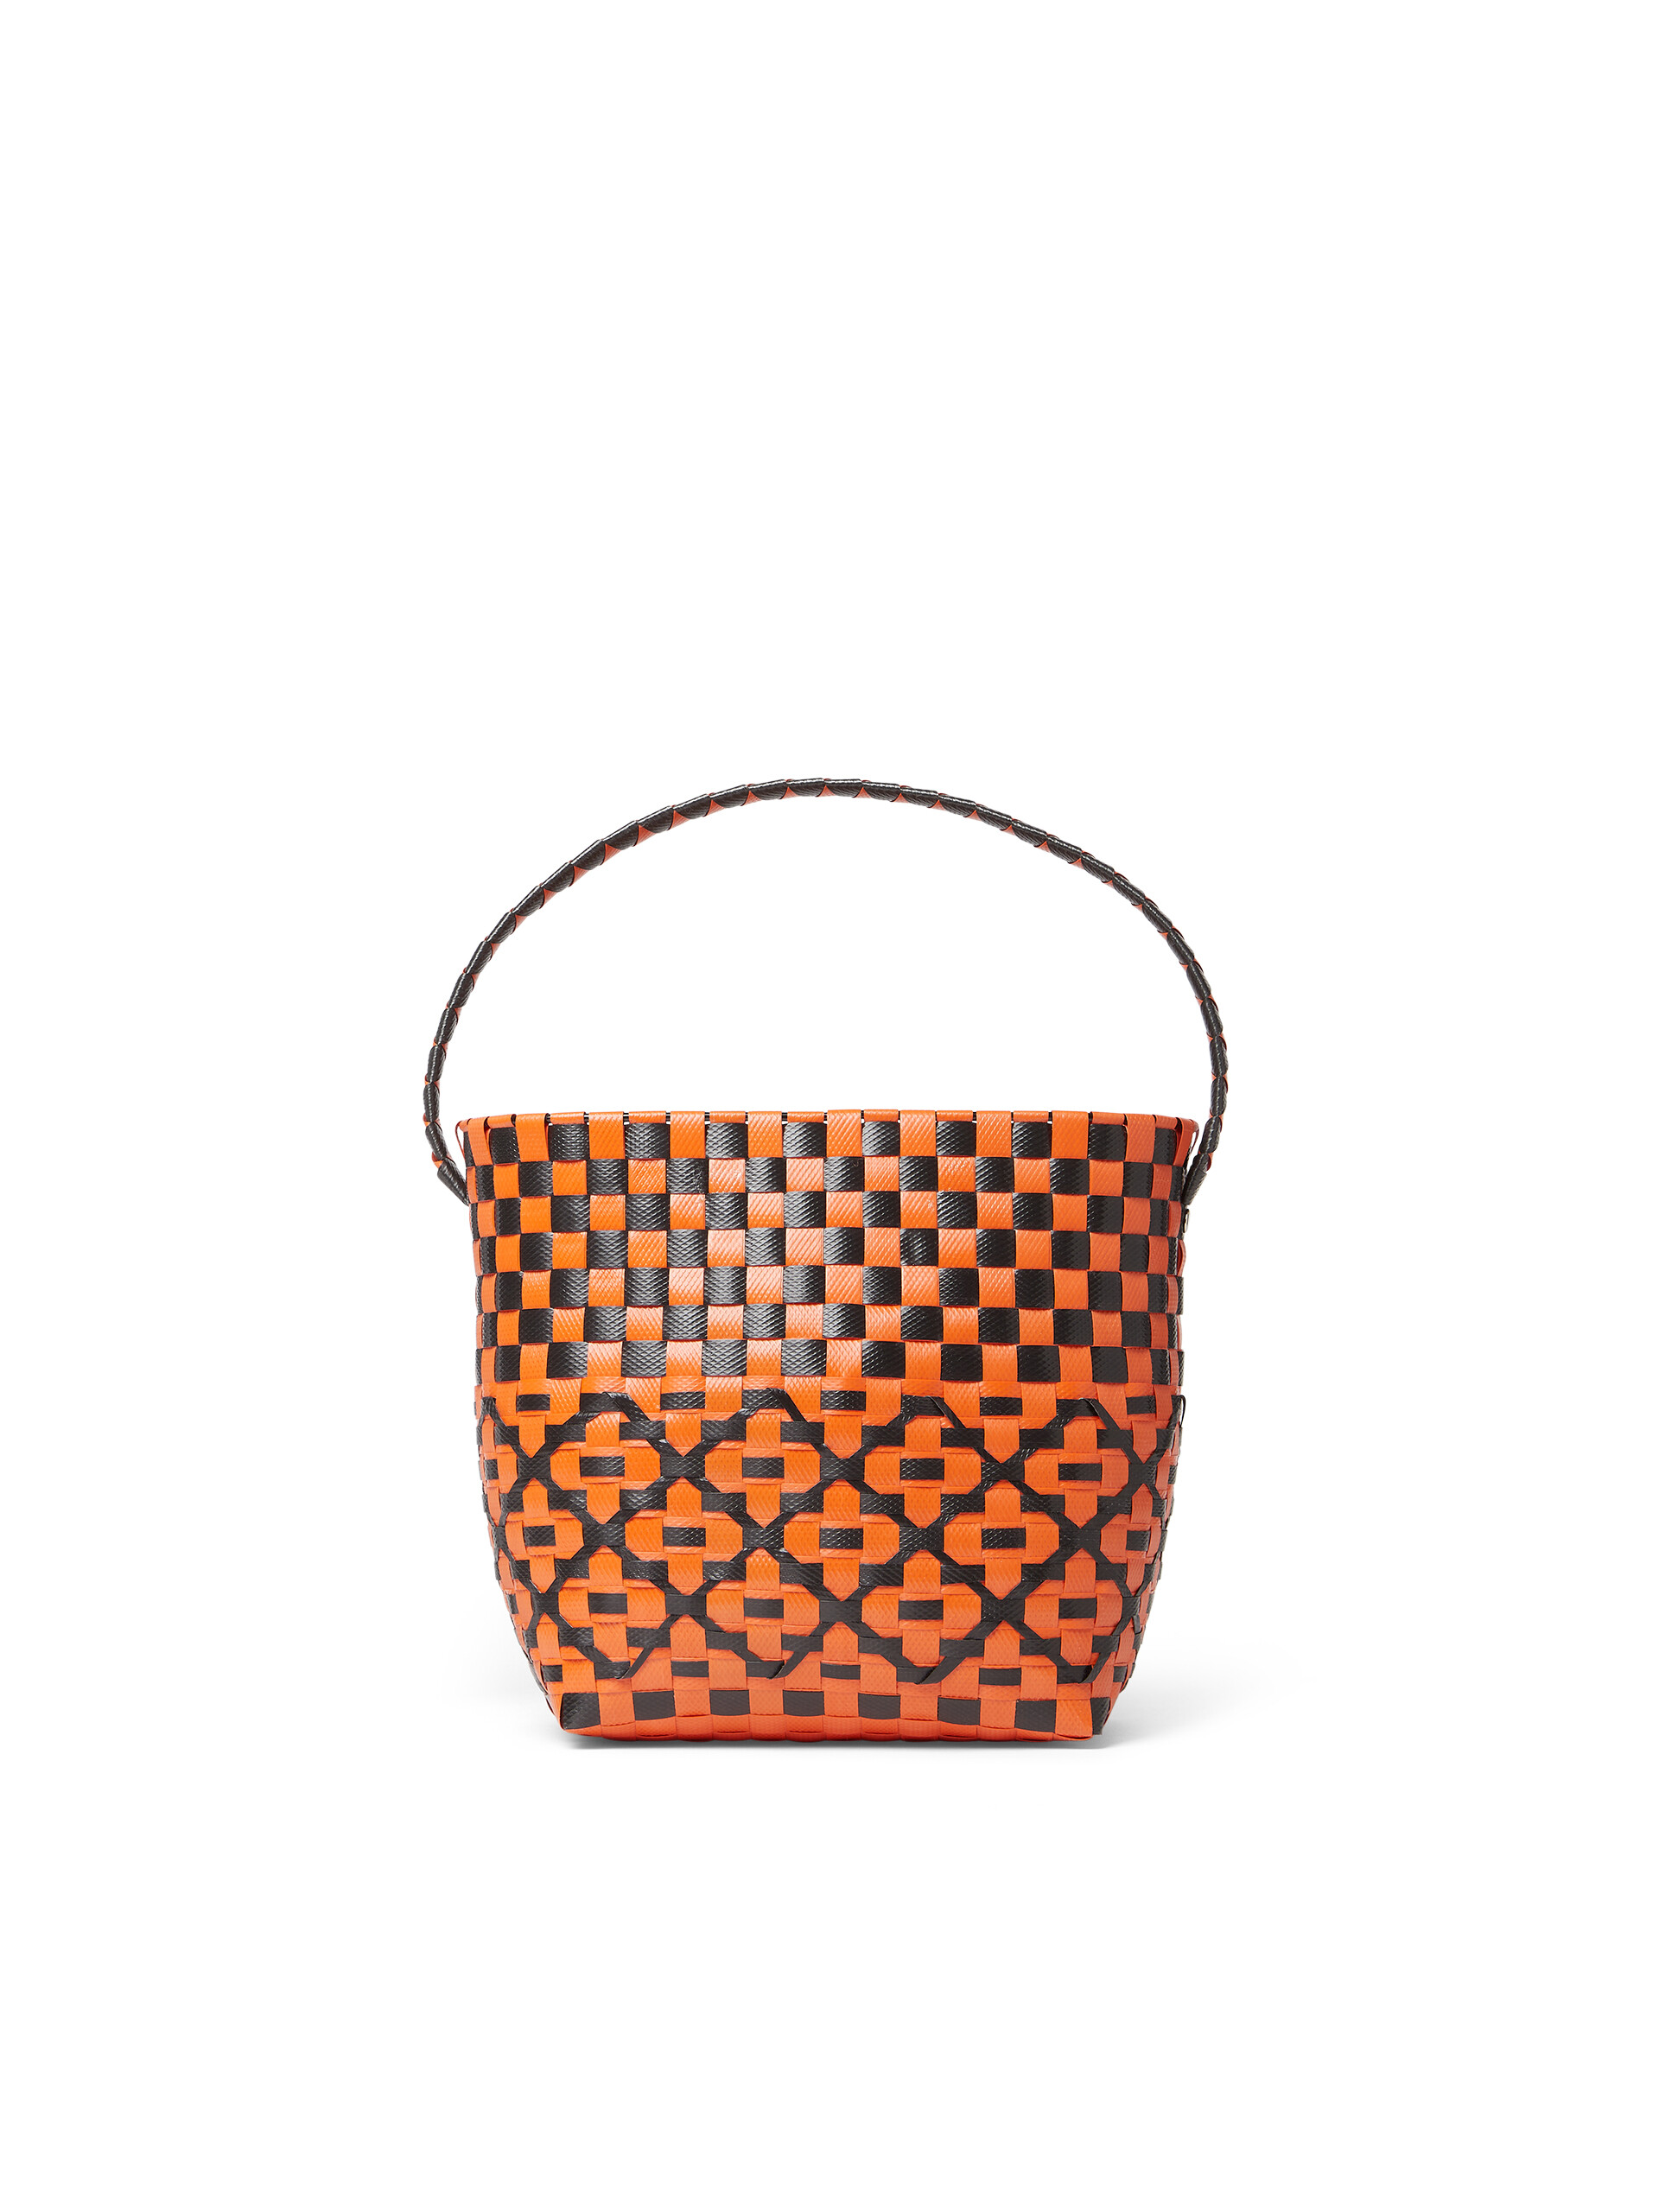 MARNI MARKET OVAL BASKET bag in orange and black woven material - Bags - Image 3